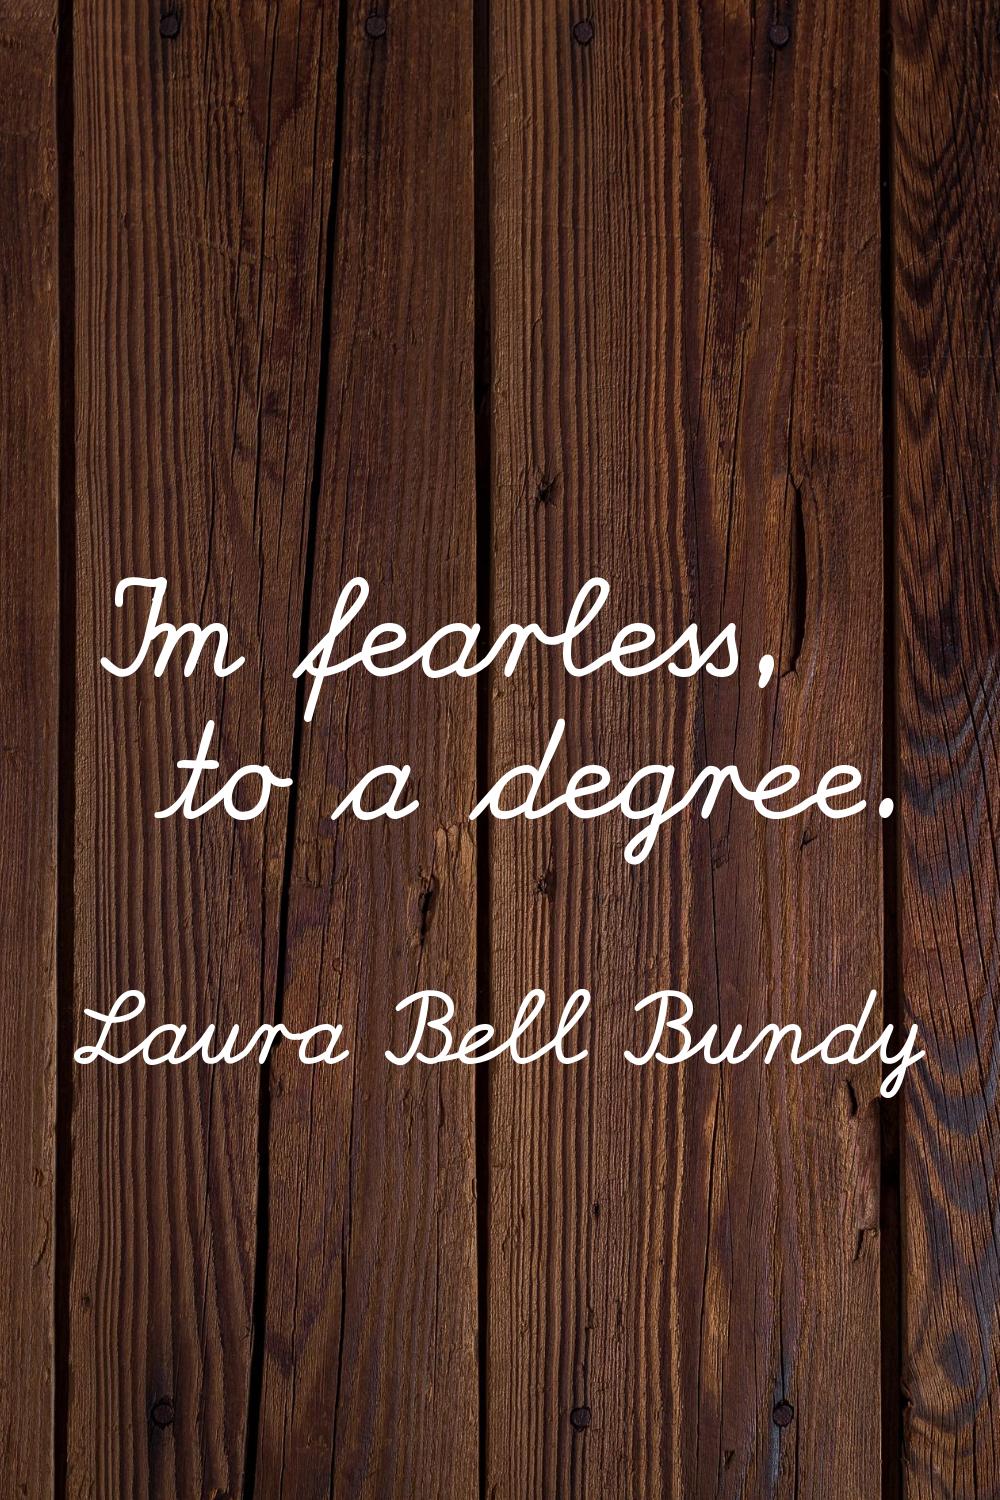 I'm fearless, to a degree.